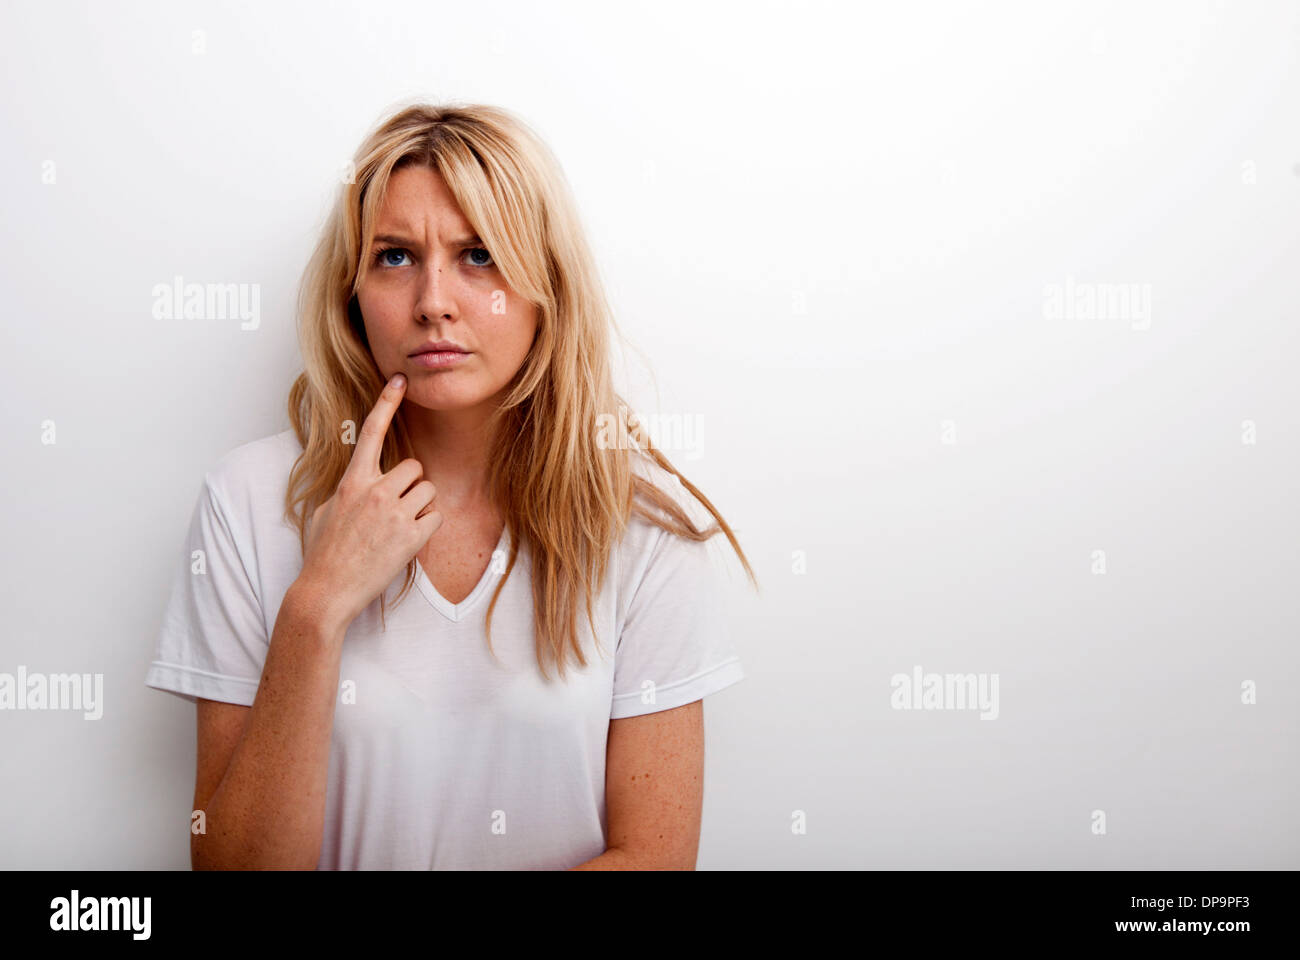 Thoughtful woman standing against white background Stock Photo